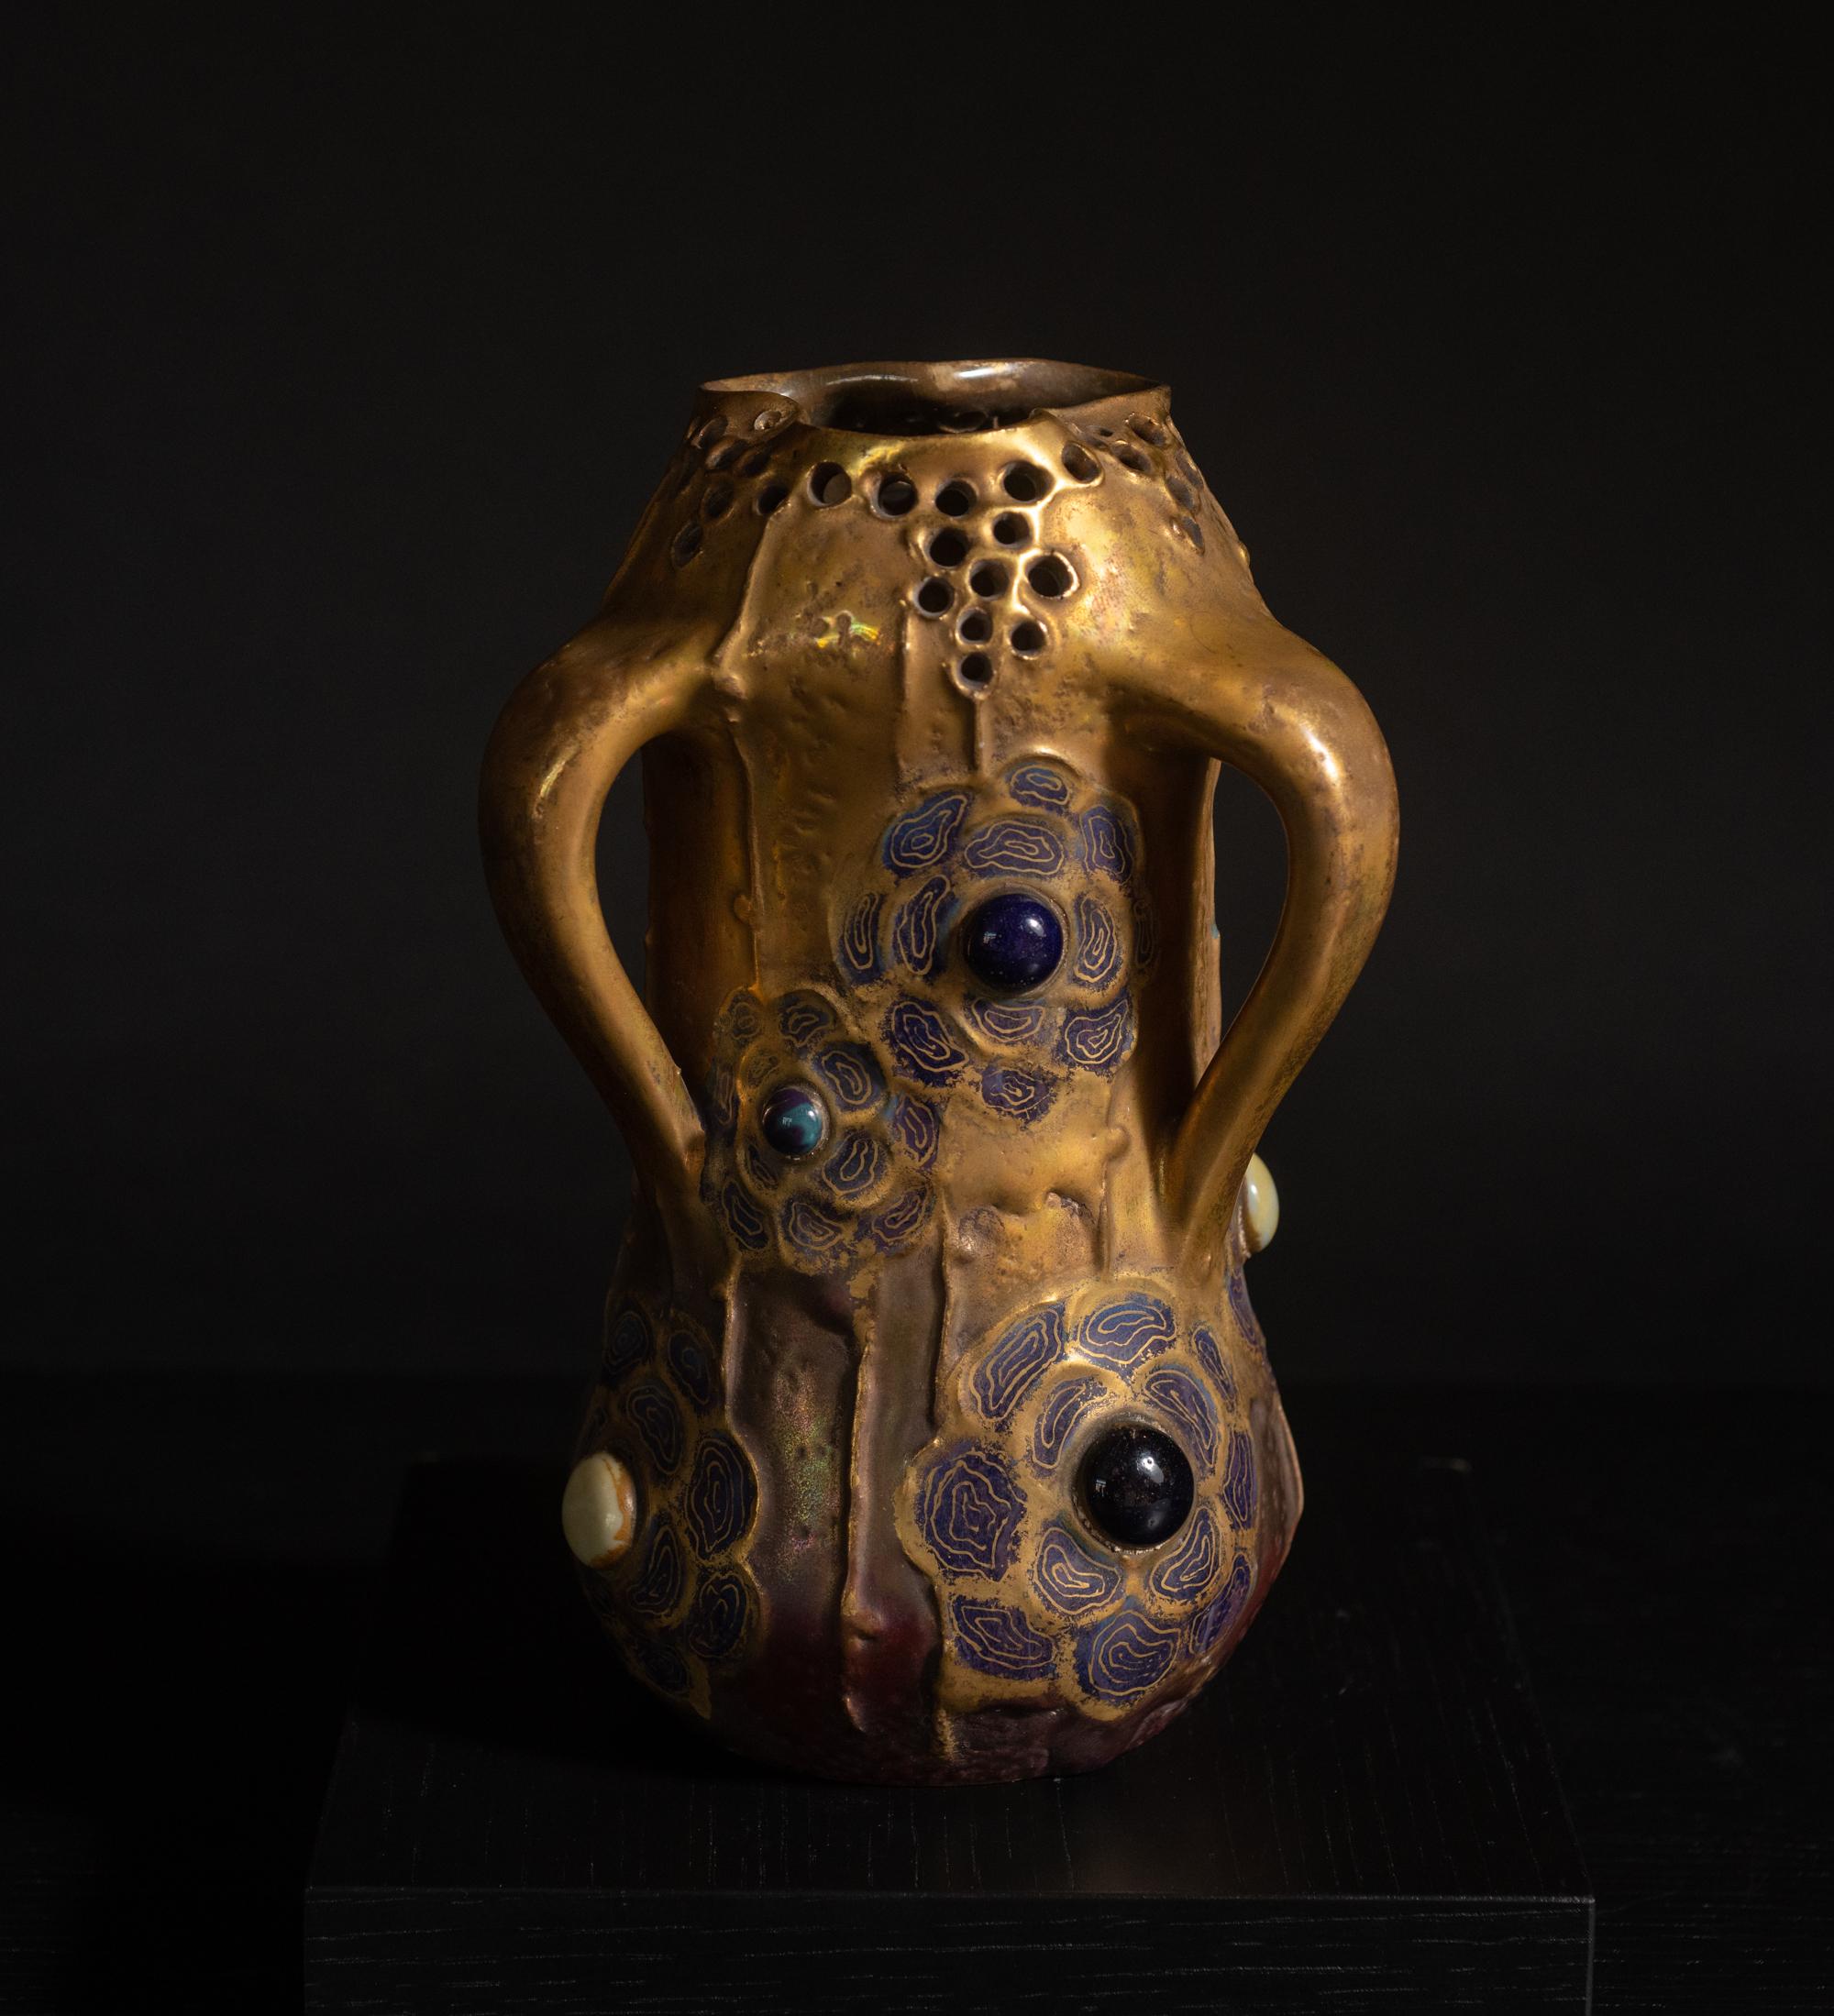 Model #3356

Riessner, Stellmacher and Kessel (RSt&K), consistently marked pieces with the tradename “Amphora” by the late 1890s and became known by that name. The Amphora pottery factory was located in Turn-Teplitz, Austria. By the mid-19th